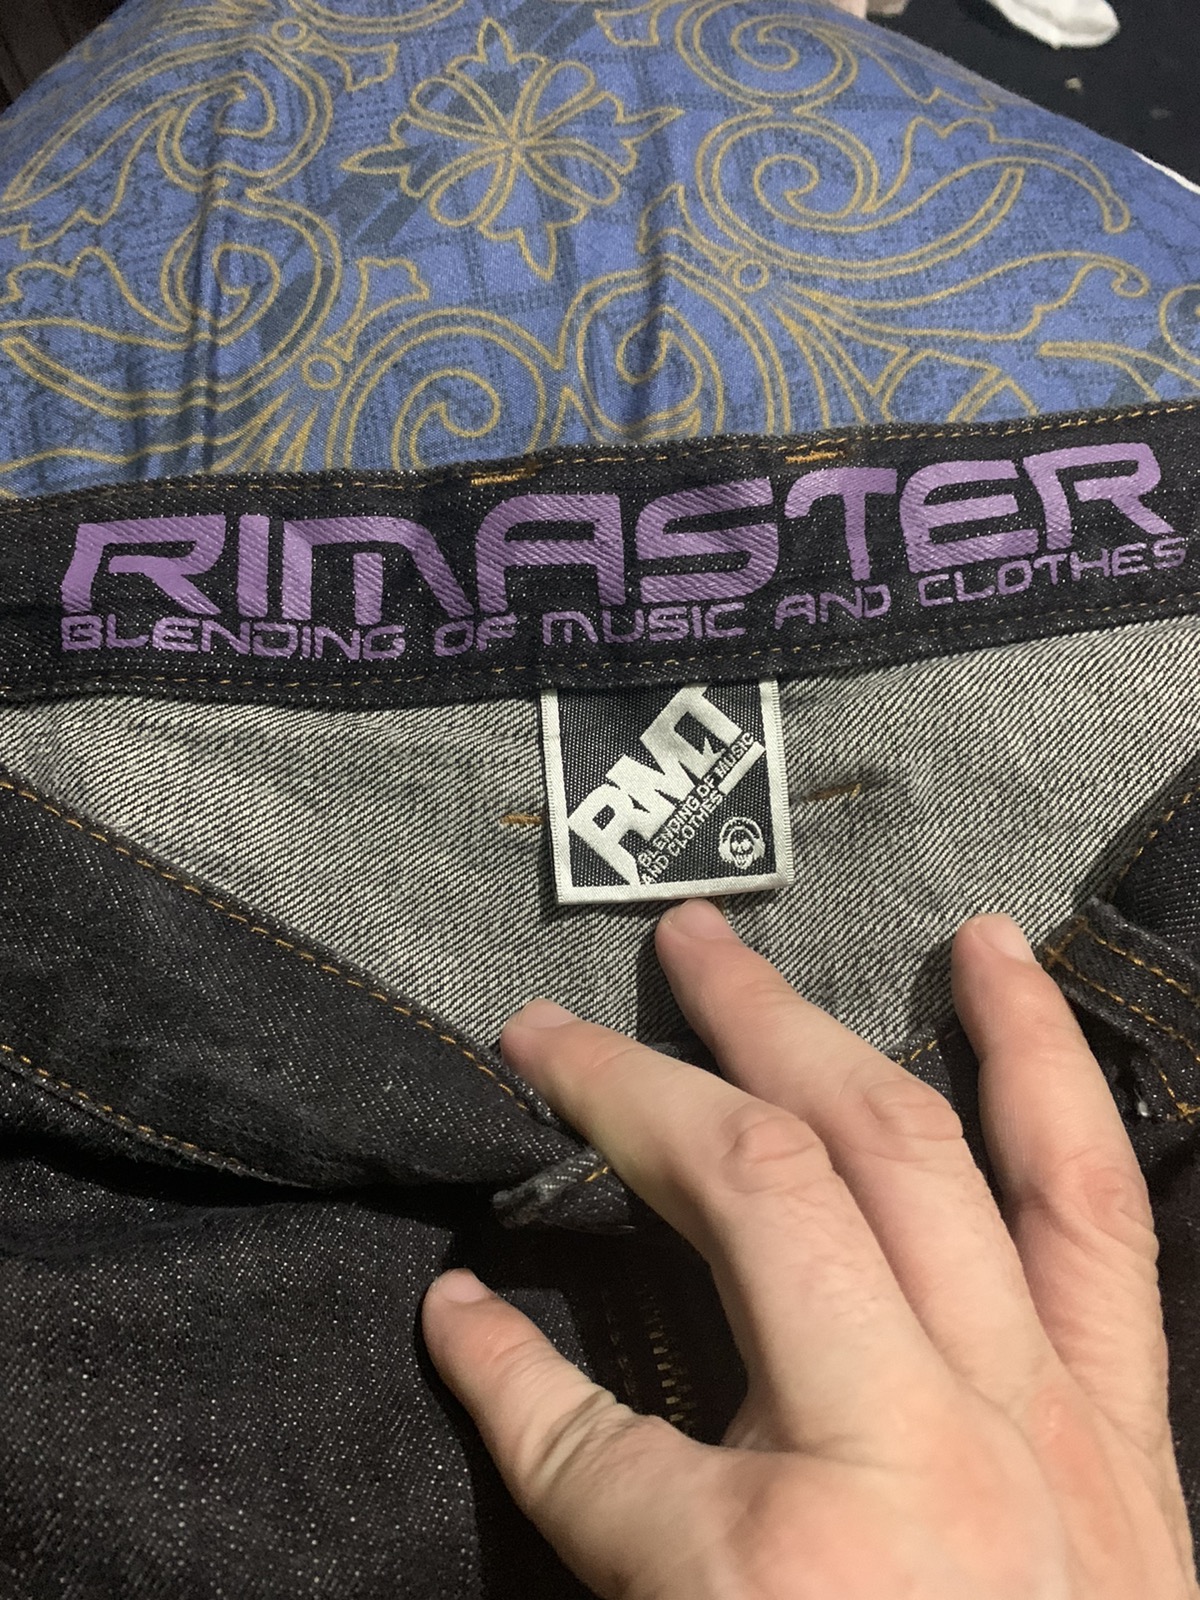 Vintage - Rimaster Blending of music and clothes - 11